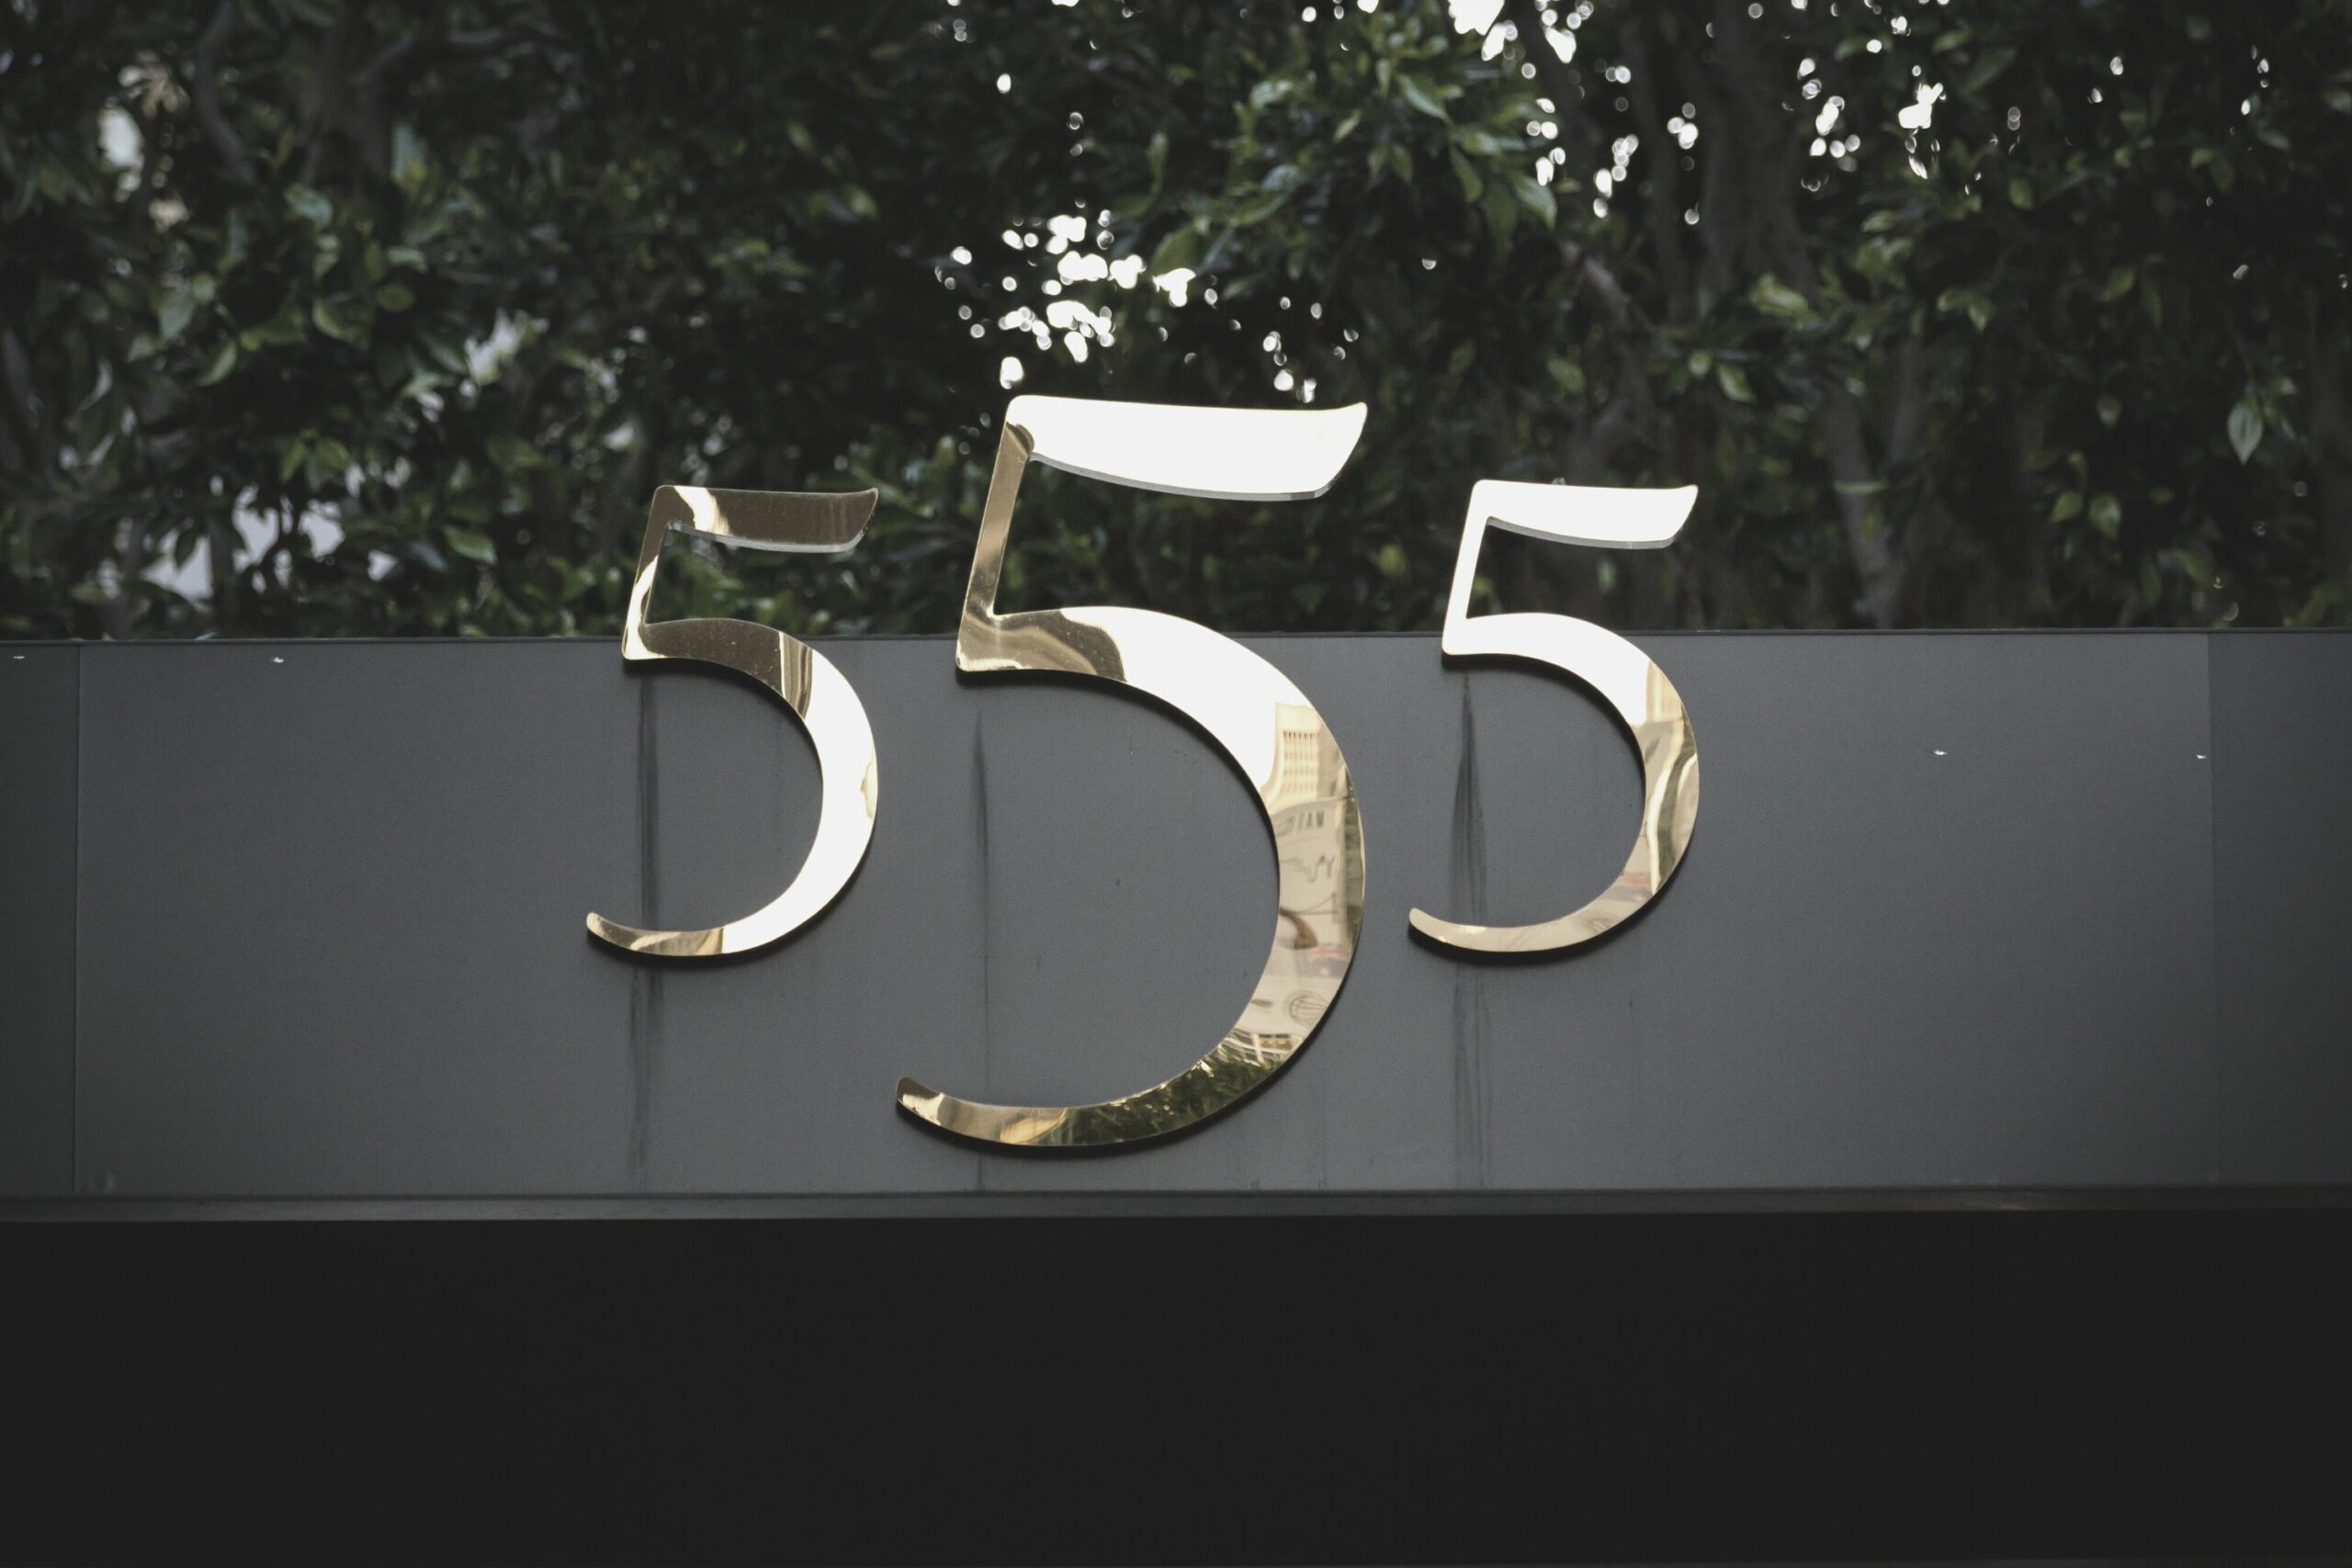 Photograph of the numbers 555 in shiny gold mounted on a building